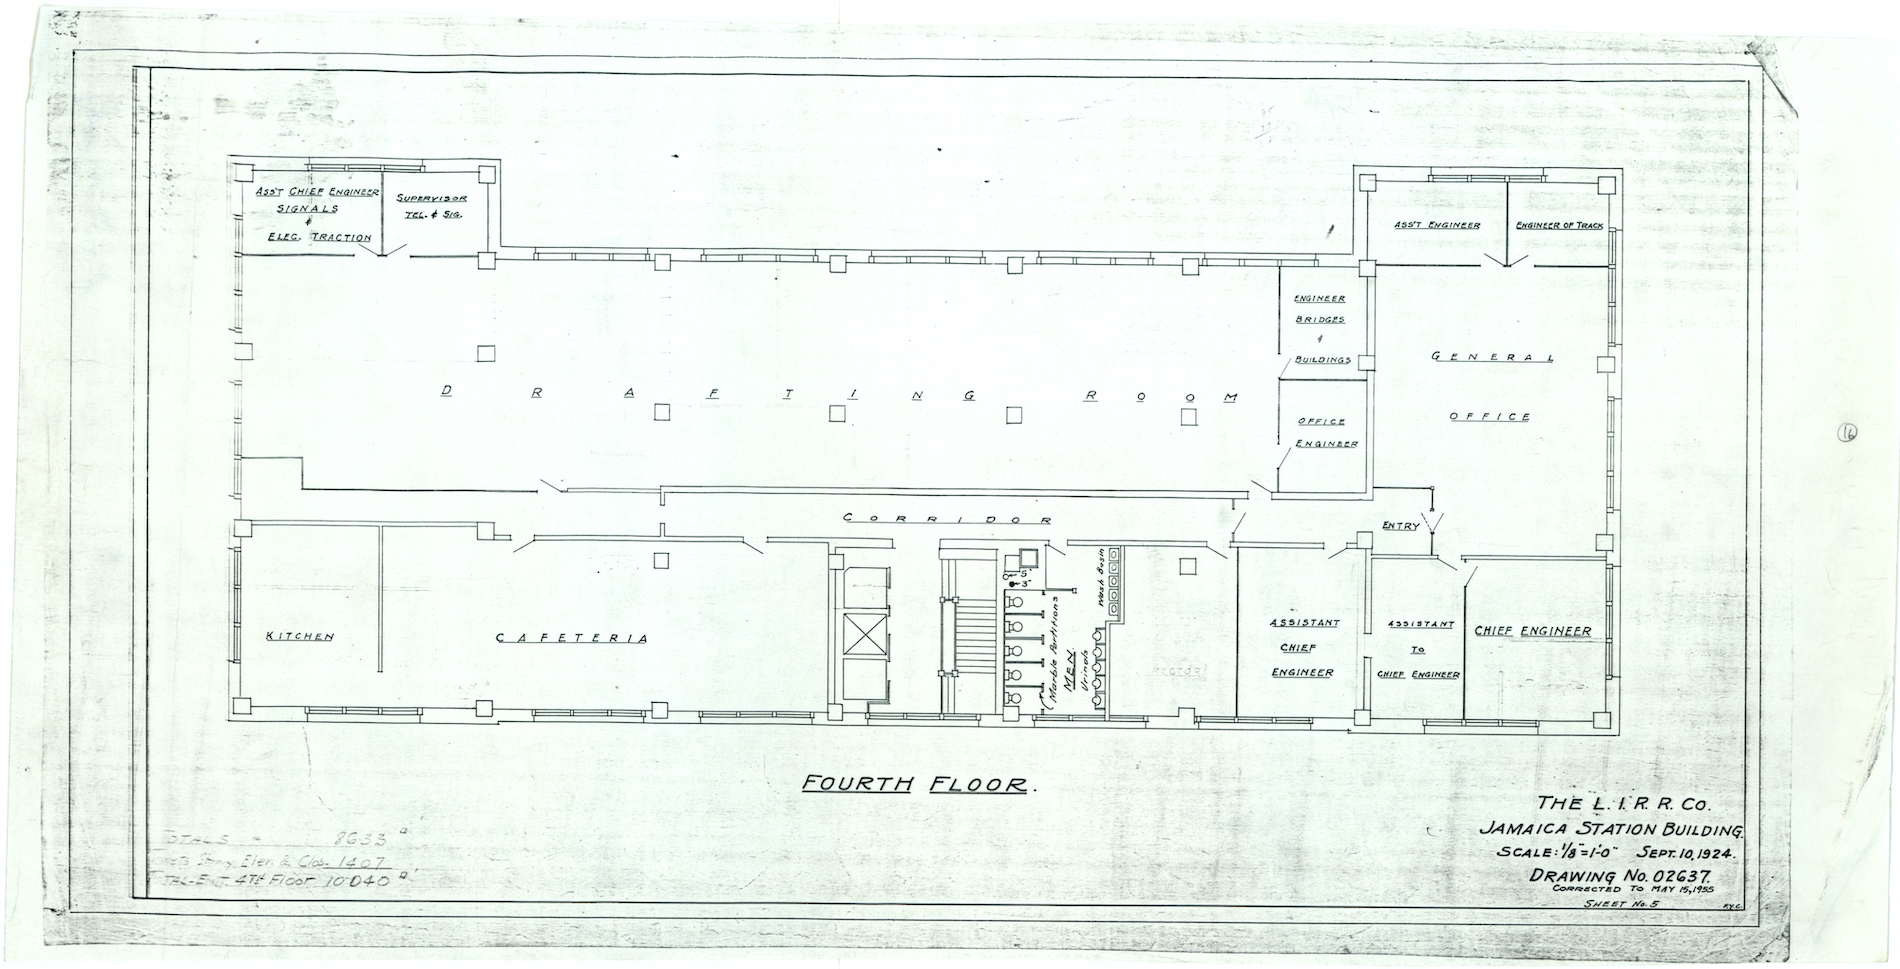 “The L.I.R.R. Co. Jamaica Station Building” (Fourth Floor) Drawing No. 02637, May 15, 1955.